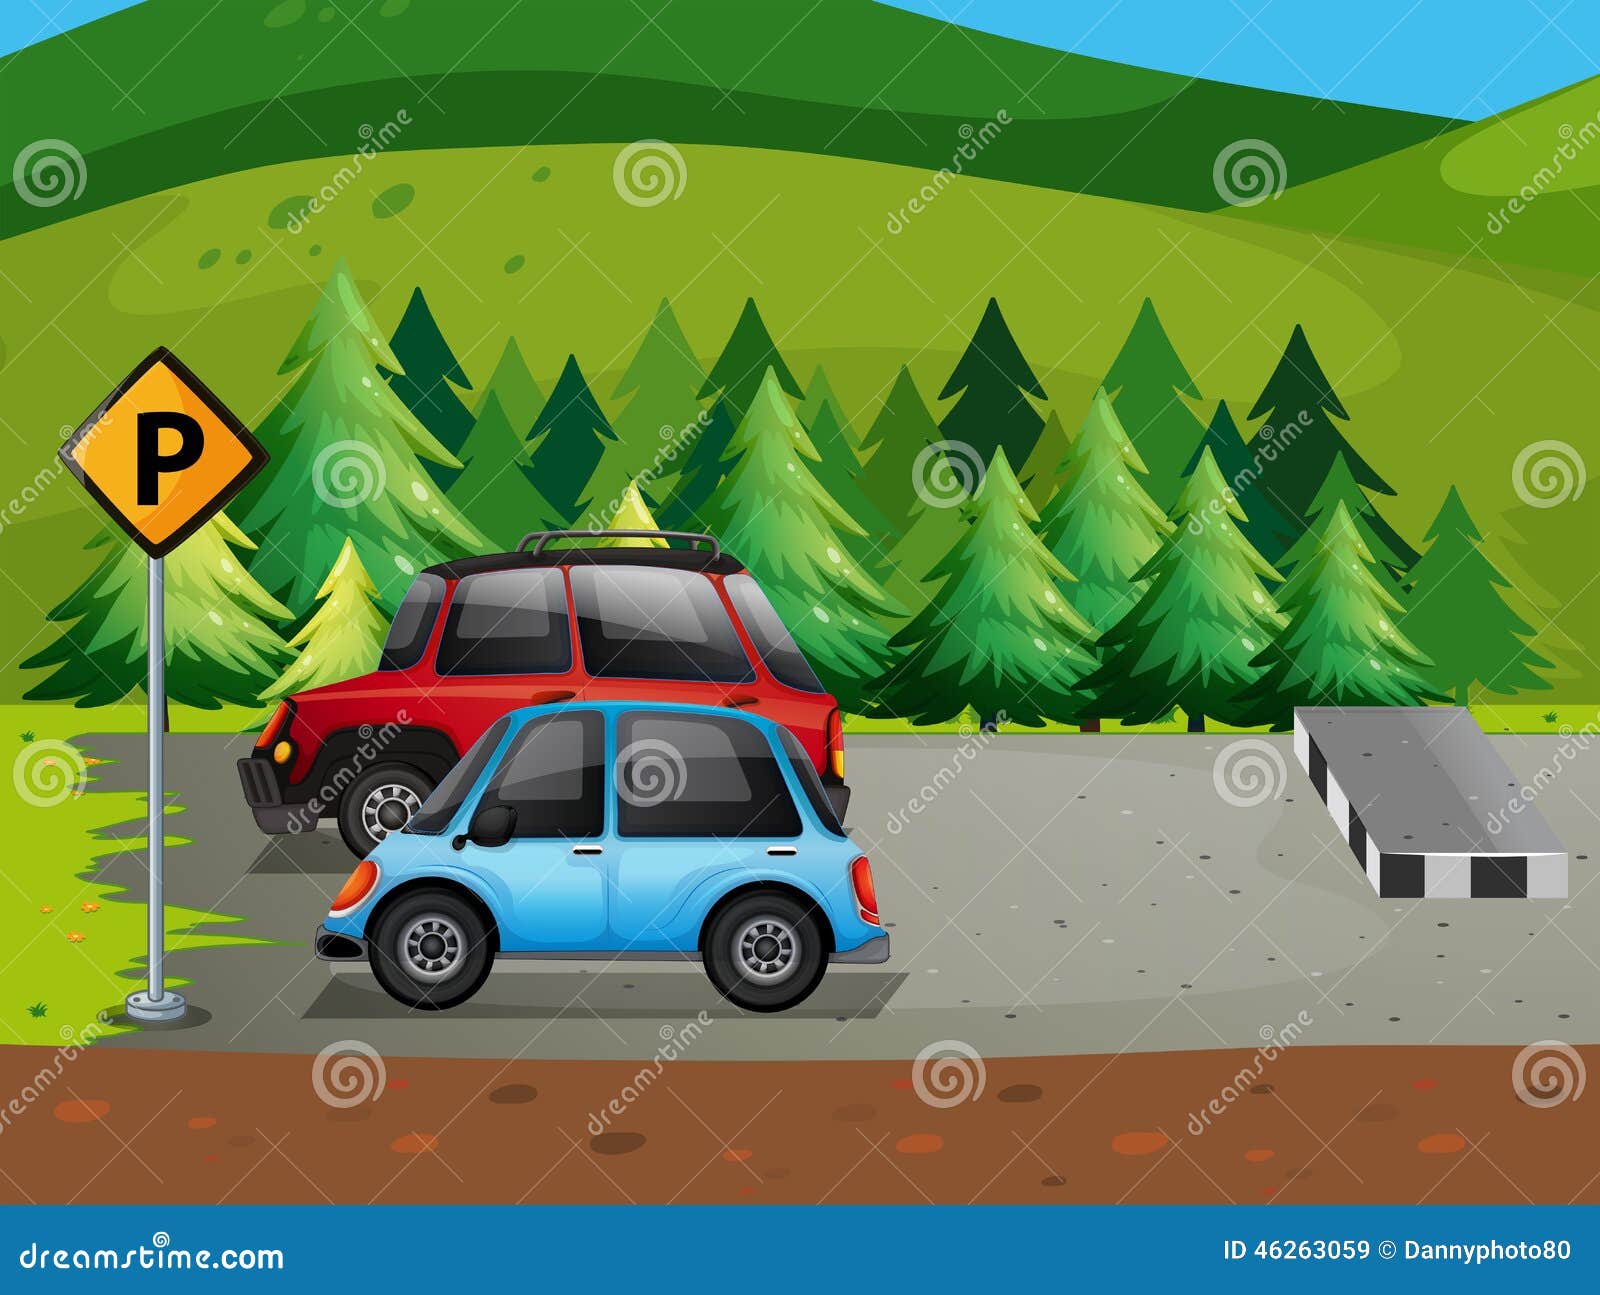 Parking Lot Stock Vector Illustration Of Nature Scenic 46263059